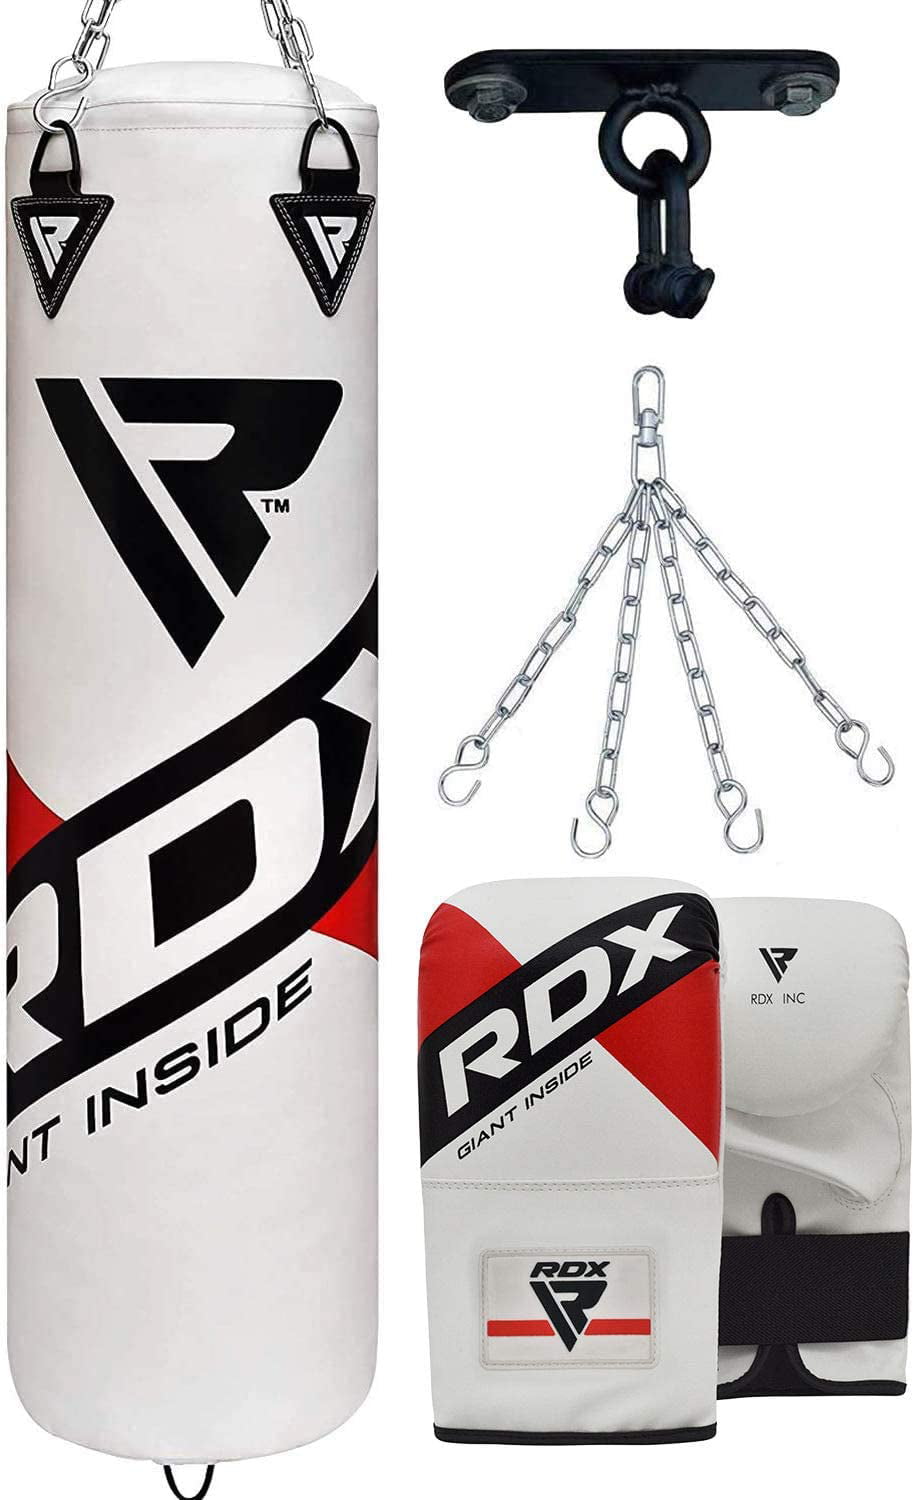 RDX Punch Bag Filled Set Kick Boxing MMA Training Gloves Heavy Punching Mitts Hanging Ceiling Hook Chain Muay Thai 4PC Martial Arts 4FT 5FT 